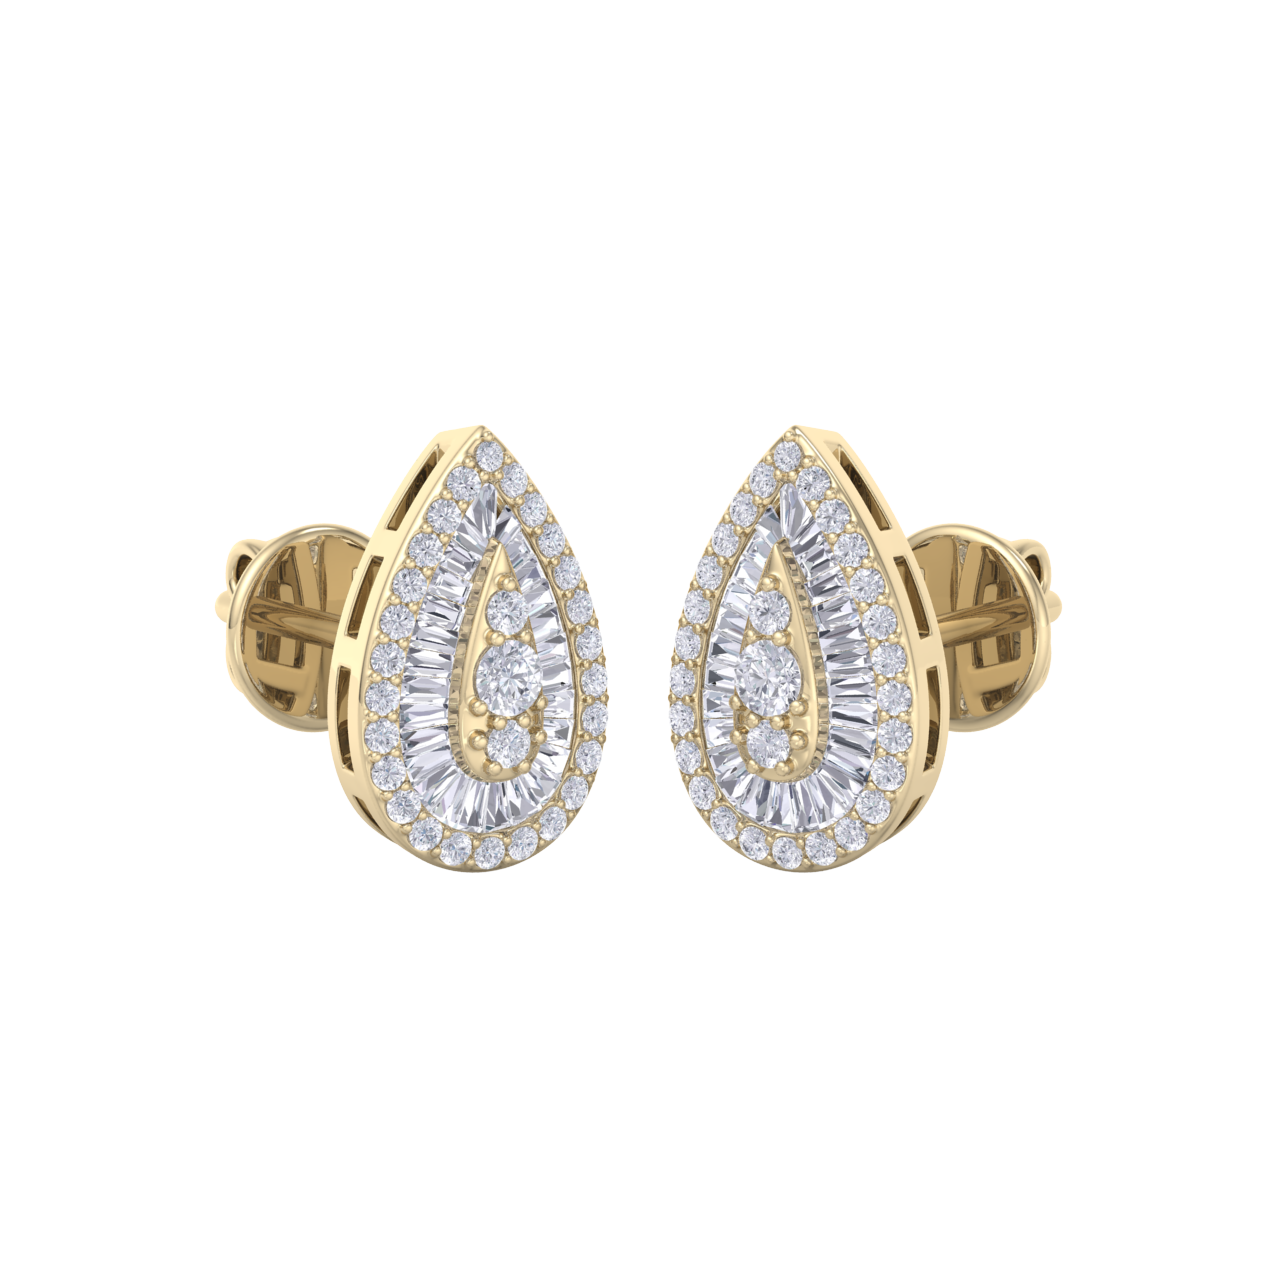 Pear shaped earrings in yellow gold with white diamonds of 0.79 ct in weight